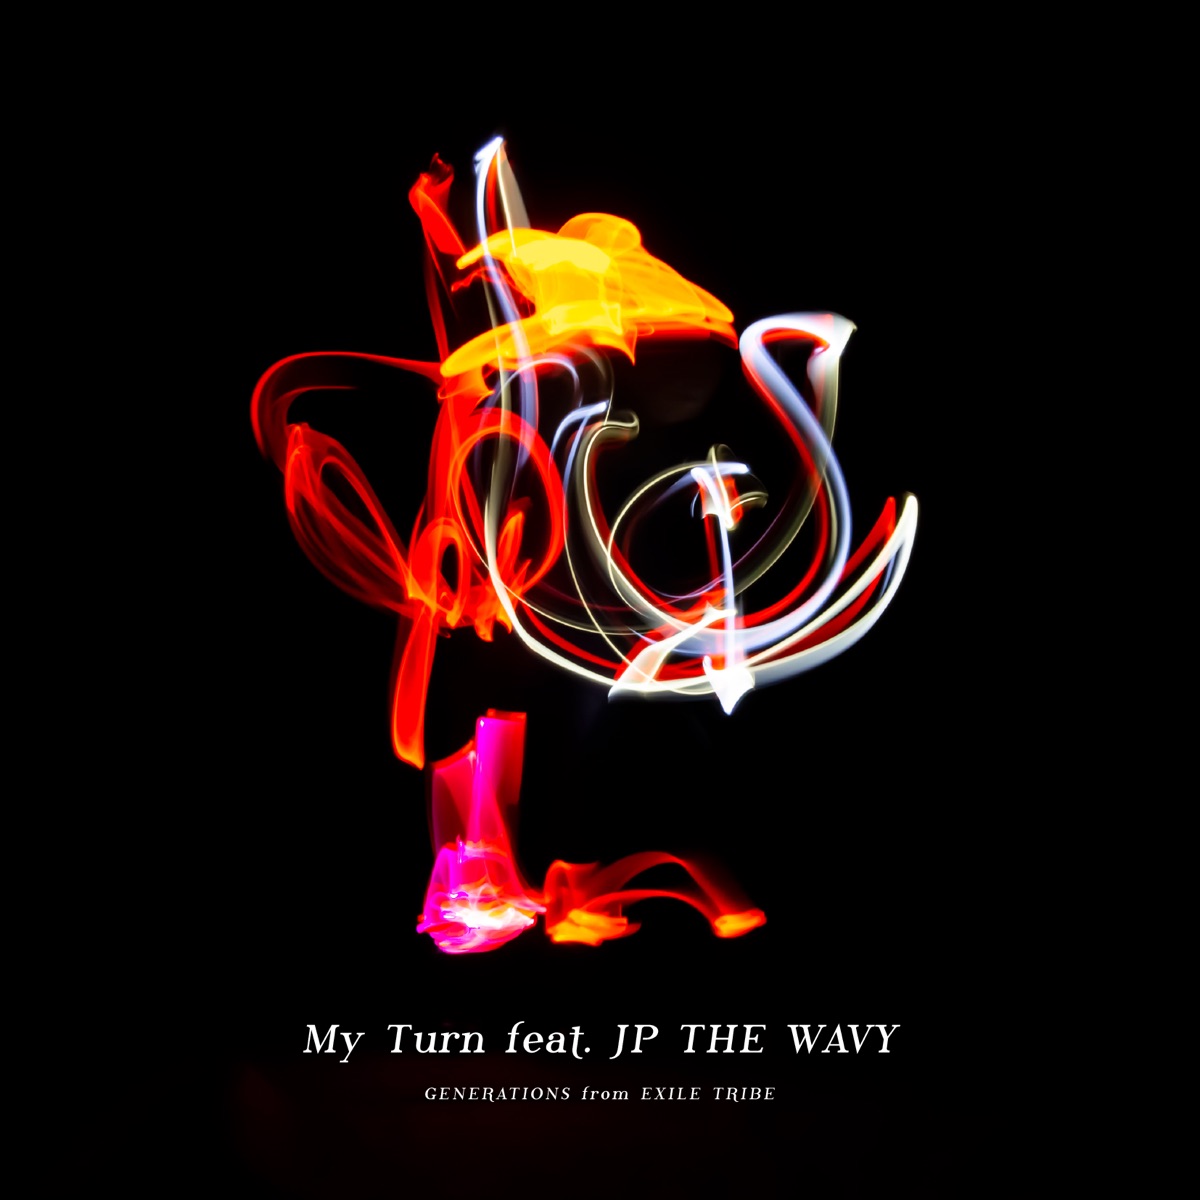 『GENERATIONS from EXILE TRIBE - My Turn feat. JP THE WAVY 歌詞』収録の『My Turn feat. JP THE WAVY』ジャケット